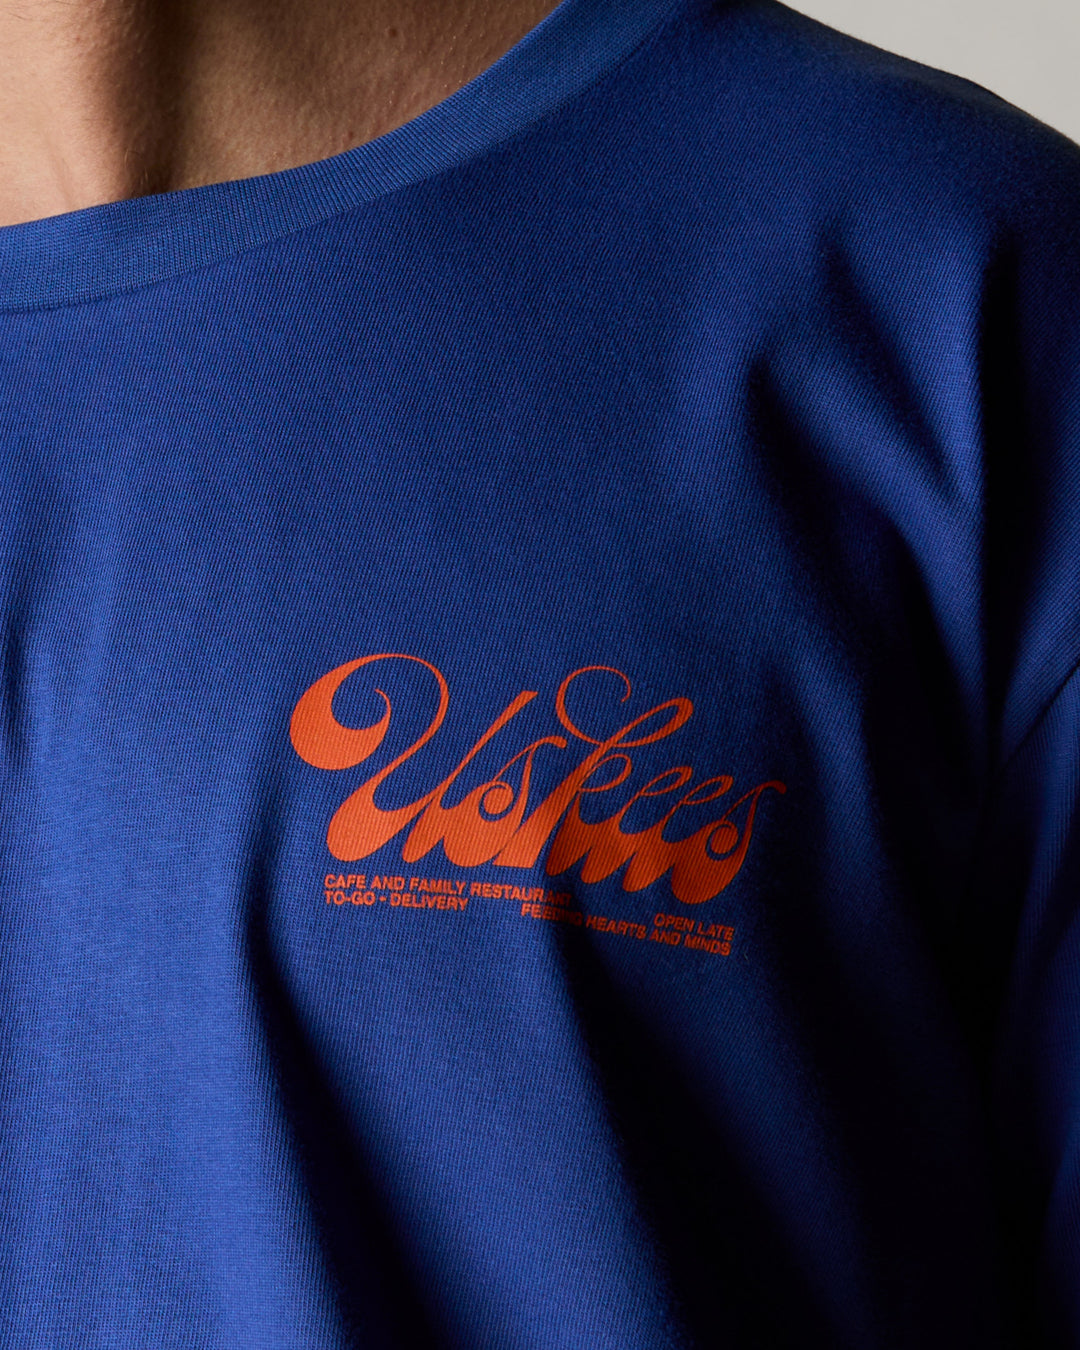 Close up front shot of model wearing  the uskees men's graphic Tee in bright  blue showing the 'diner' logo in orange